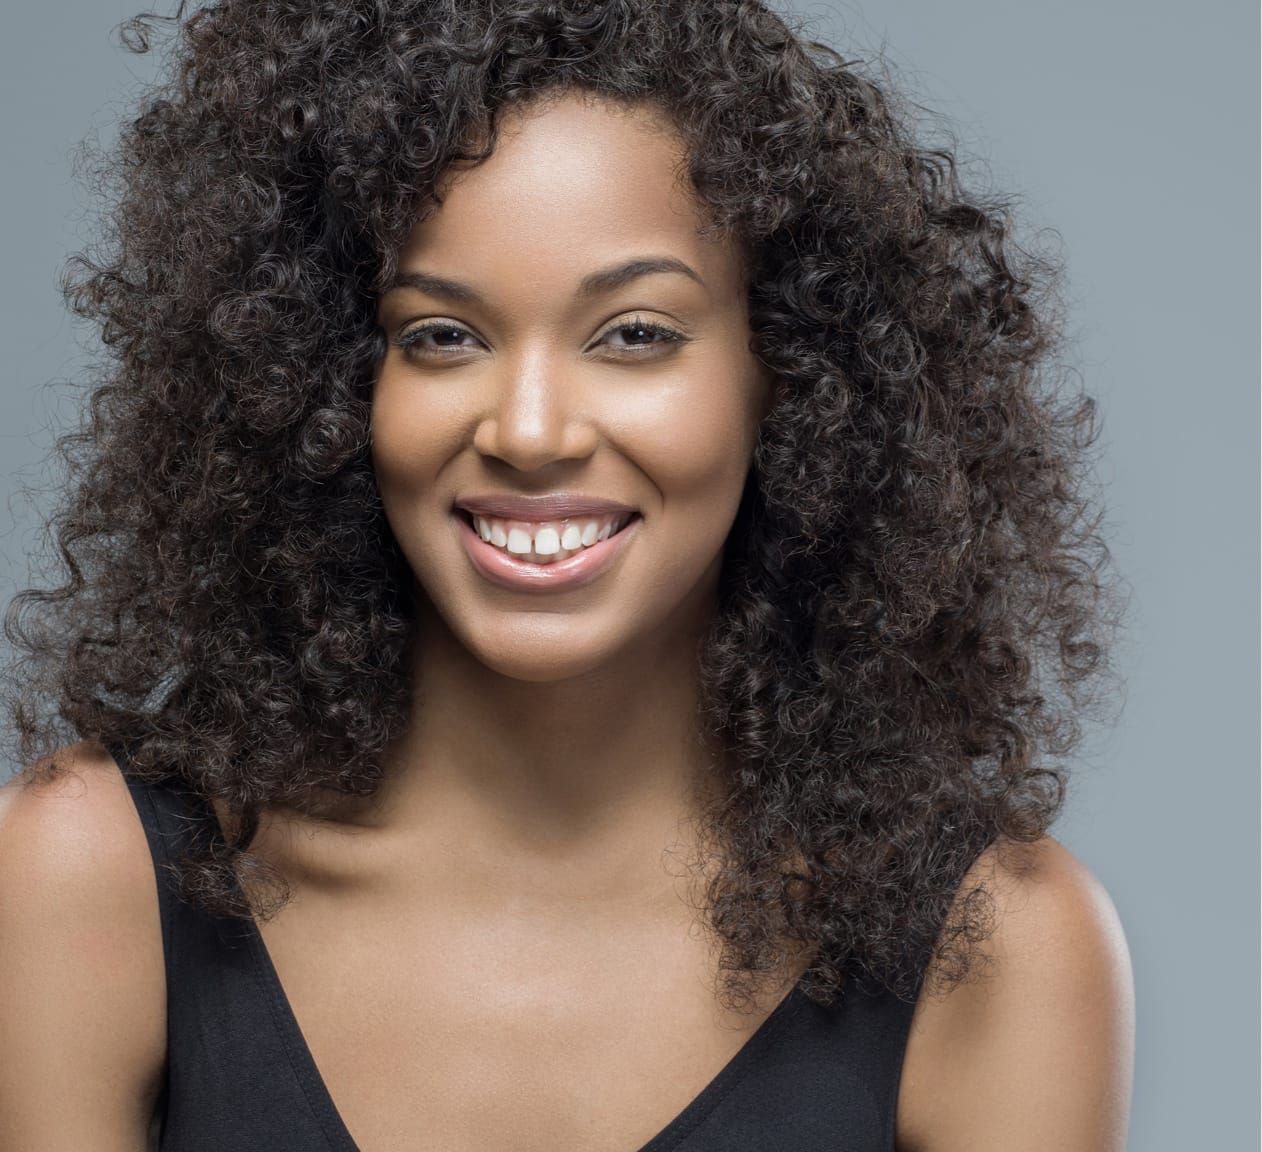 smiling woman with curly hair